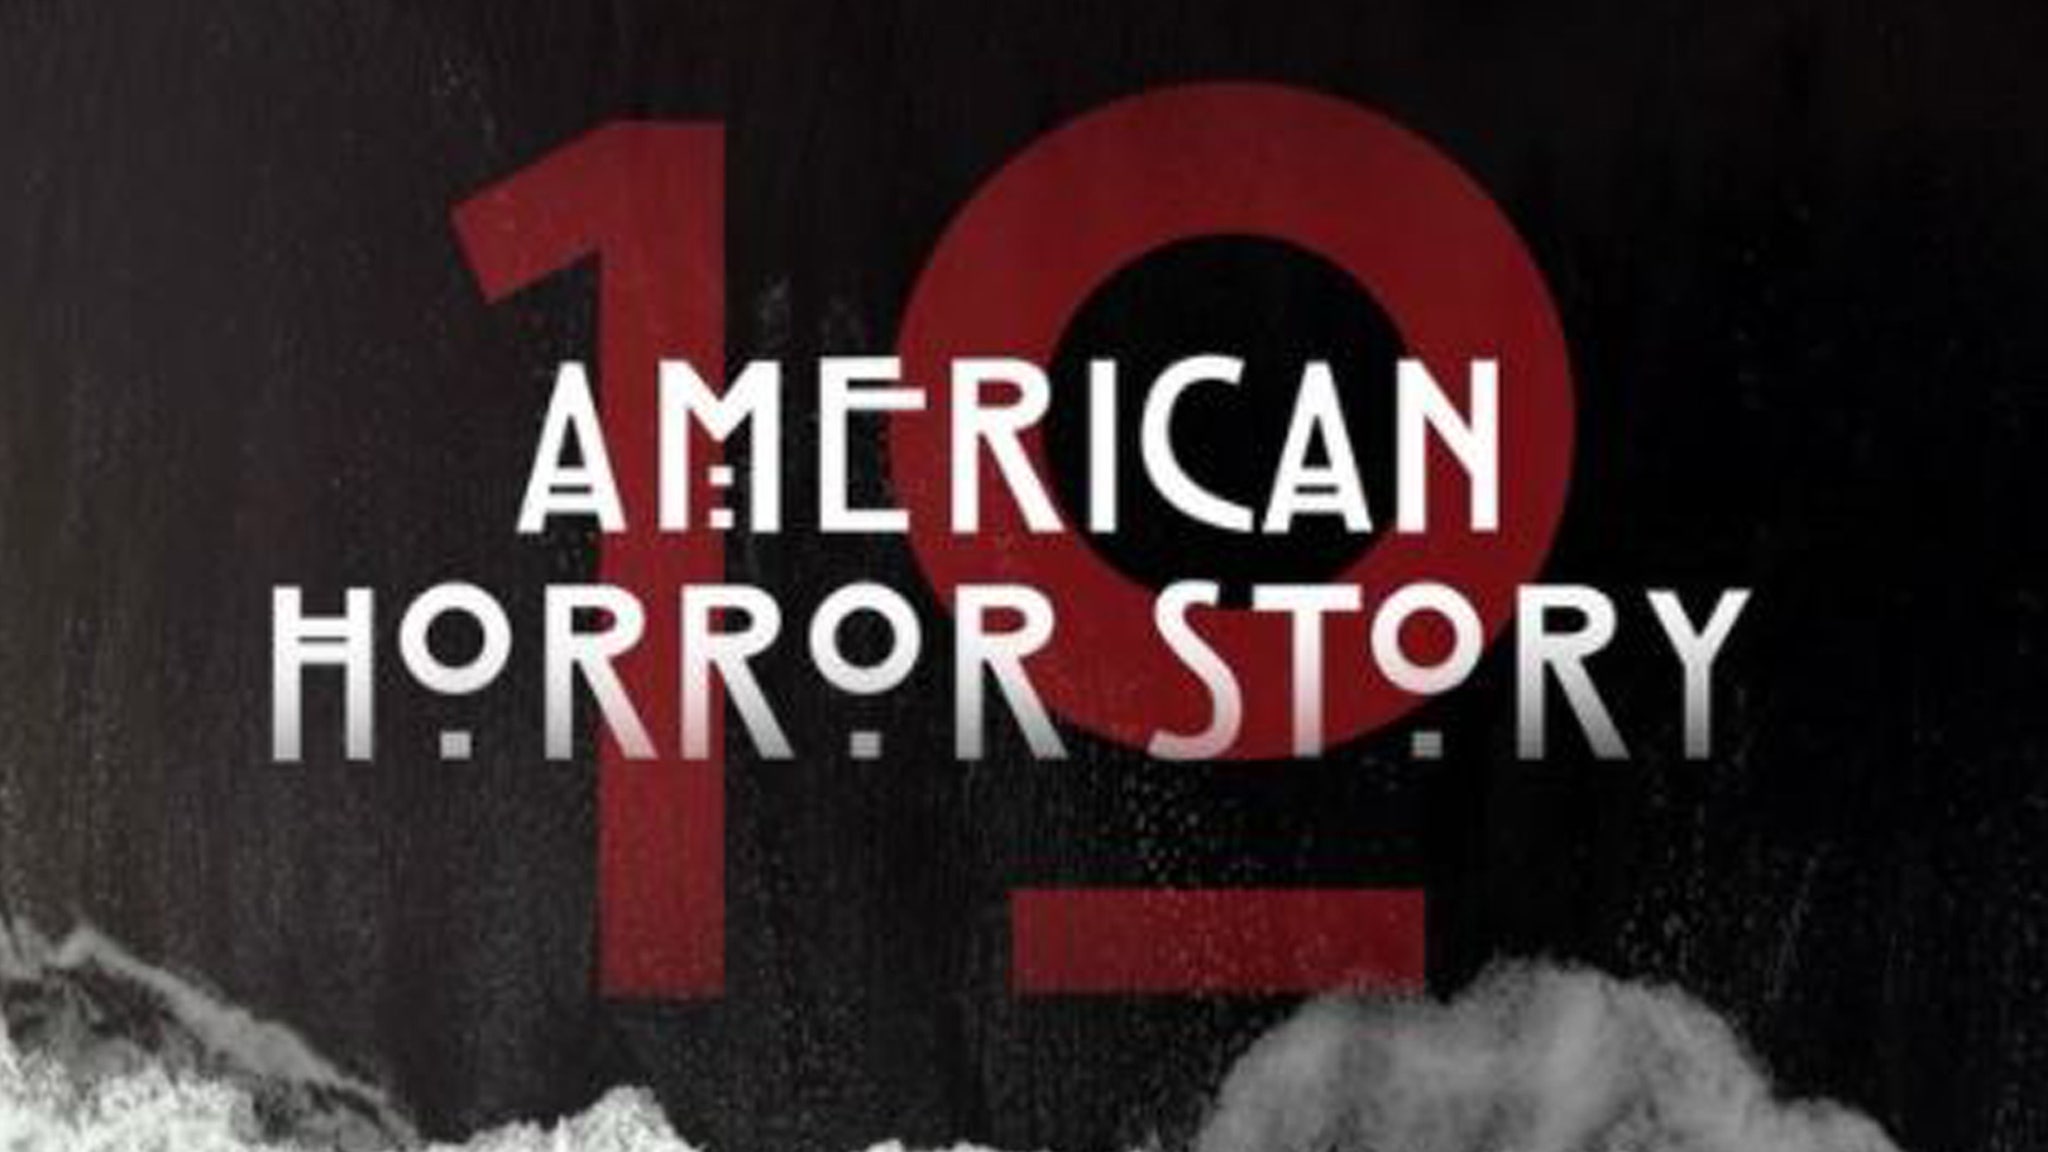 American Horror Story 10th season title and twist revealed